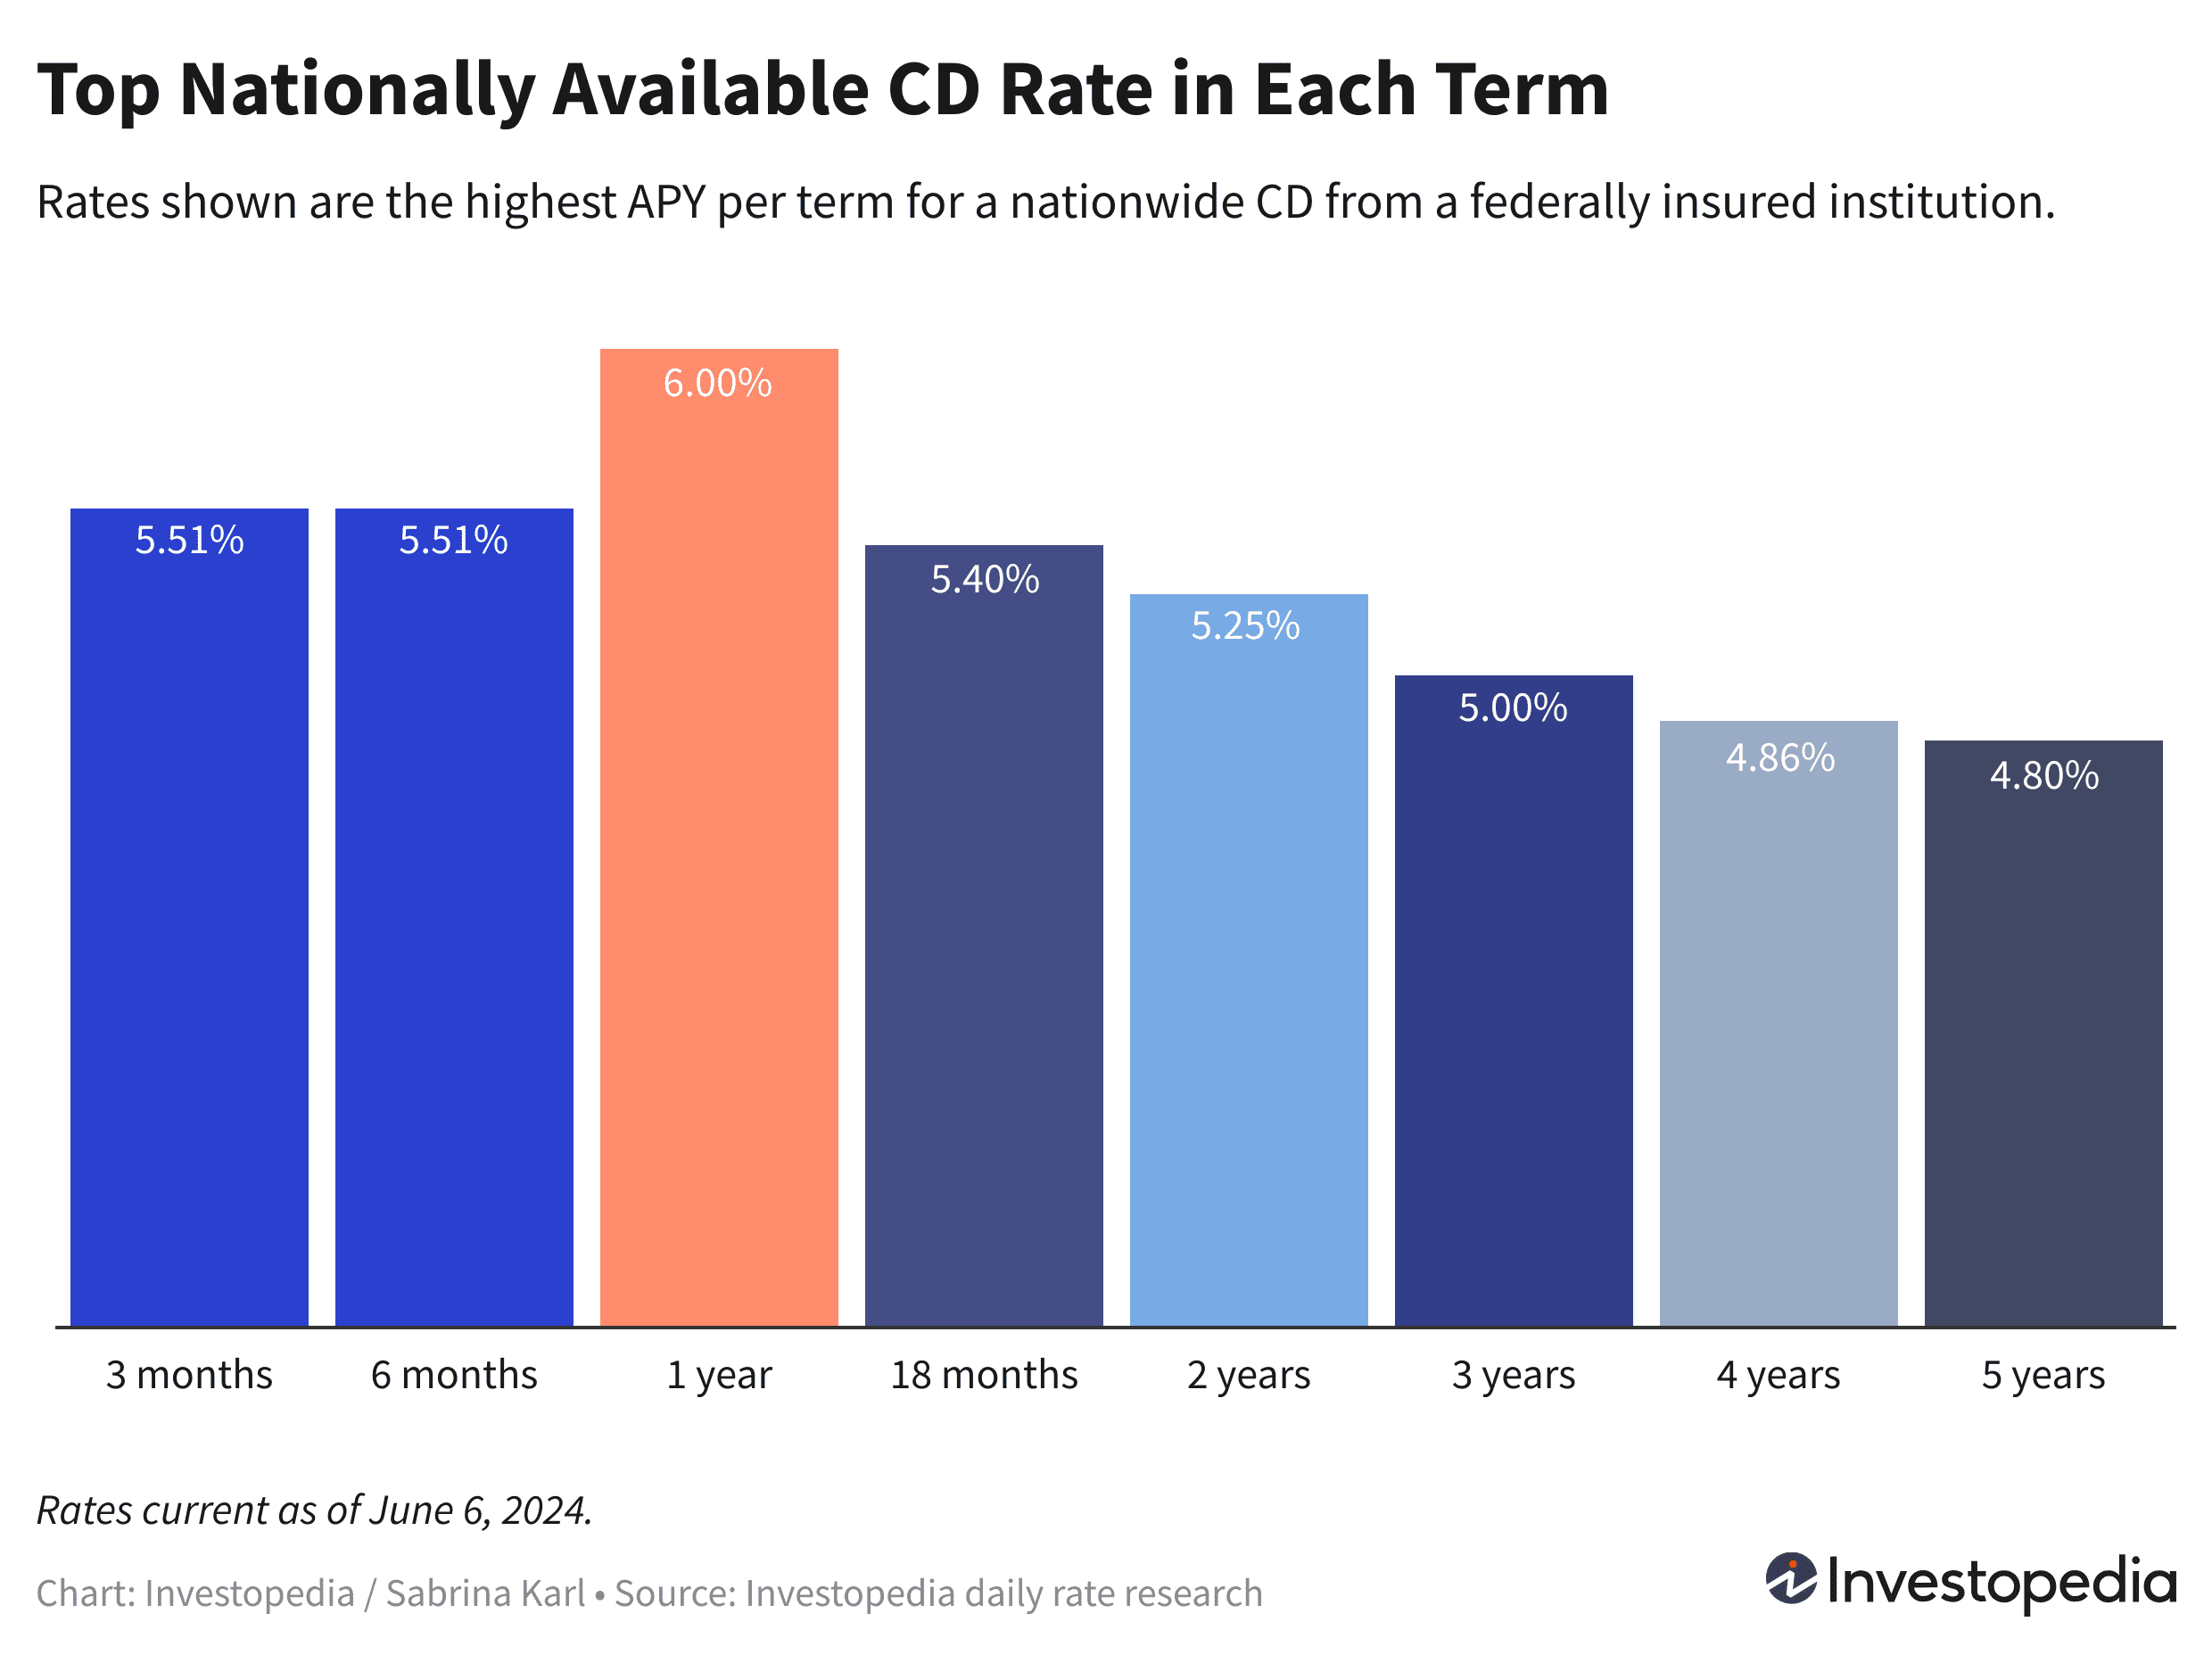 Top nationwide CD rate in each term, ranging from 4.80% to 6.00%, current as of June 6, 2024.